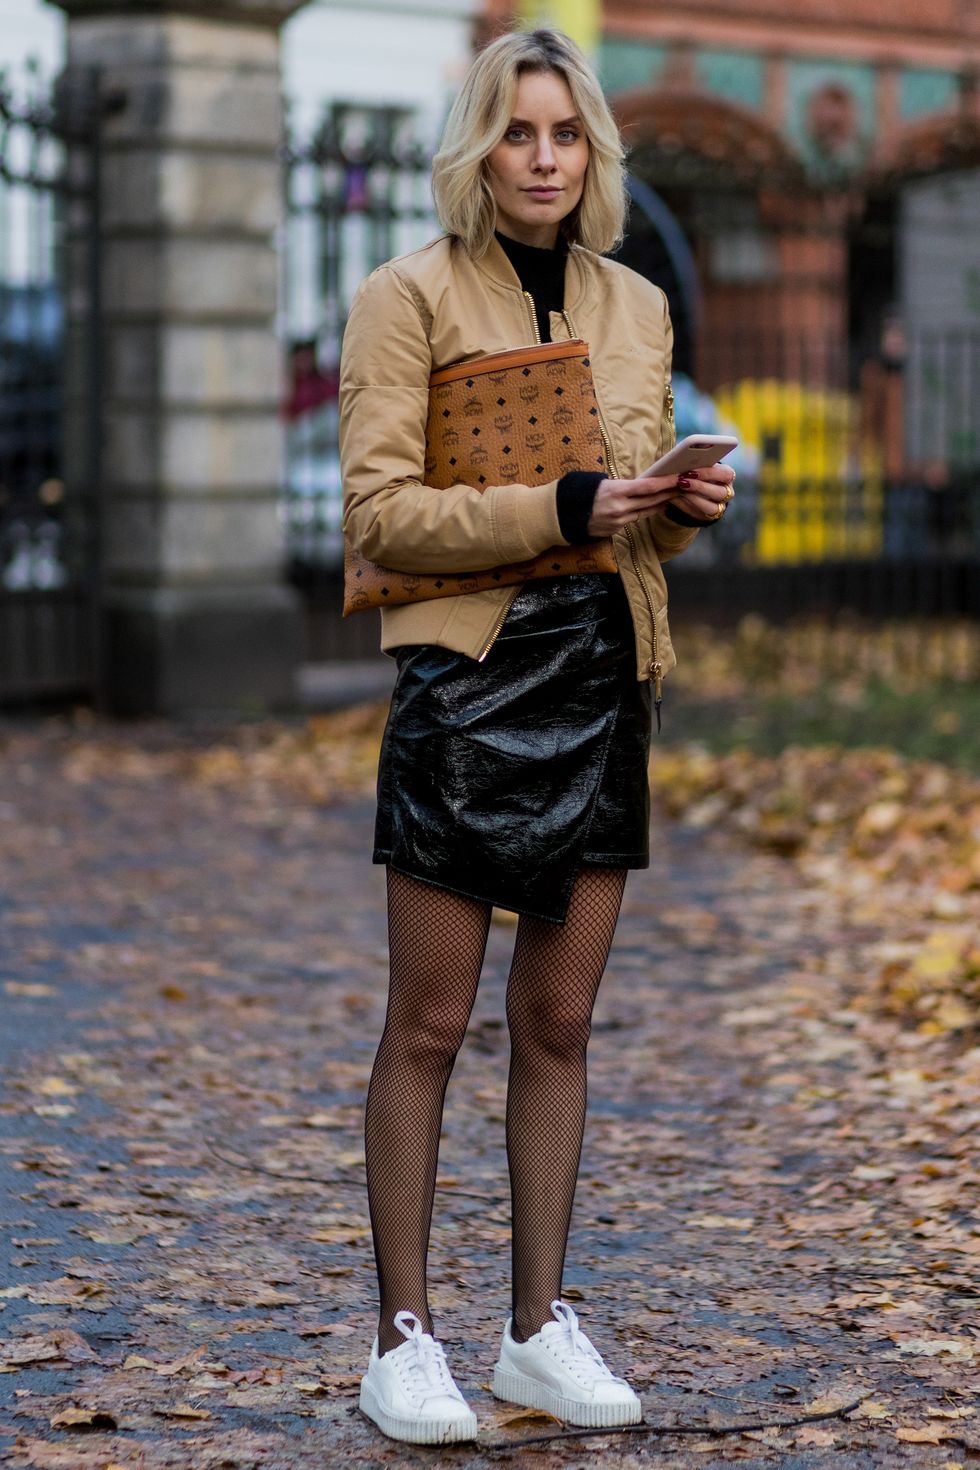 Sneakers and Tights: 5 Outfits That Prove This Isn't a Faux Pas